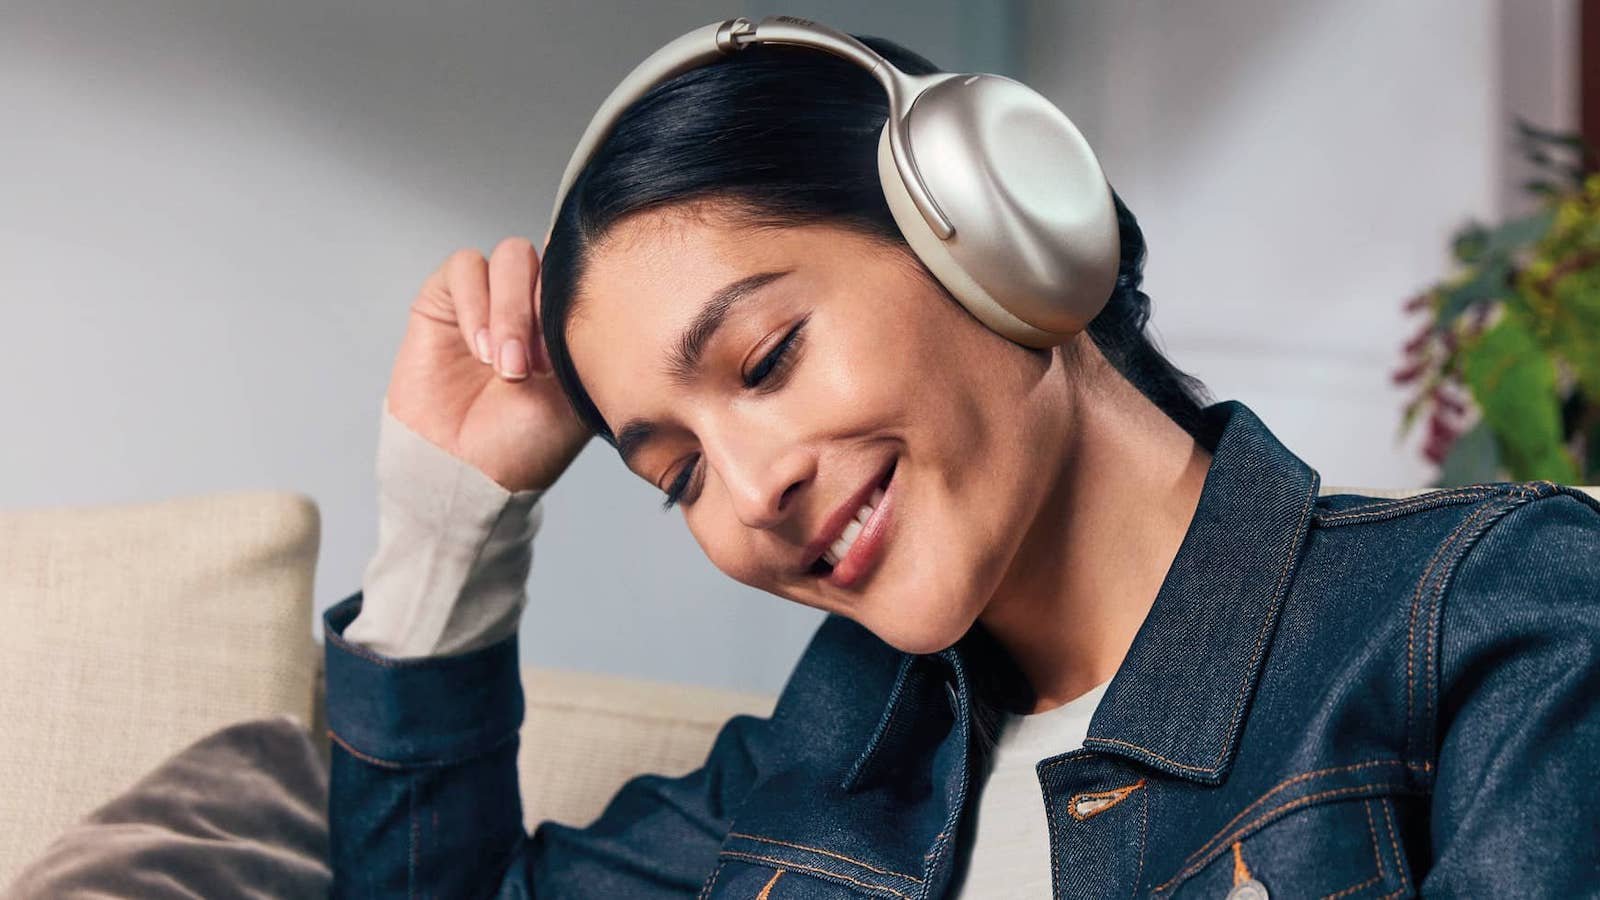 KEF Mu7 noise-canceling over-ear headphones have an intuitive design with smart ANC